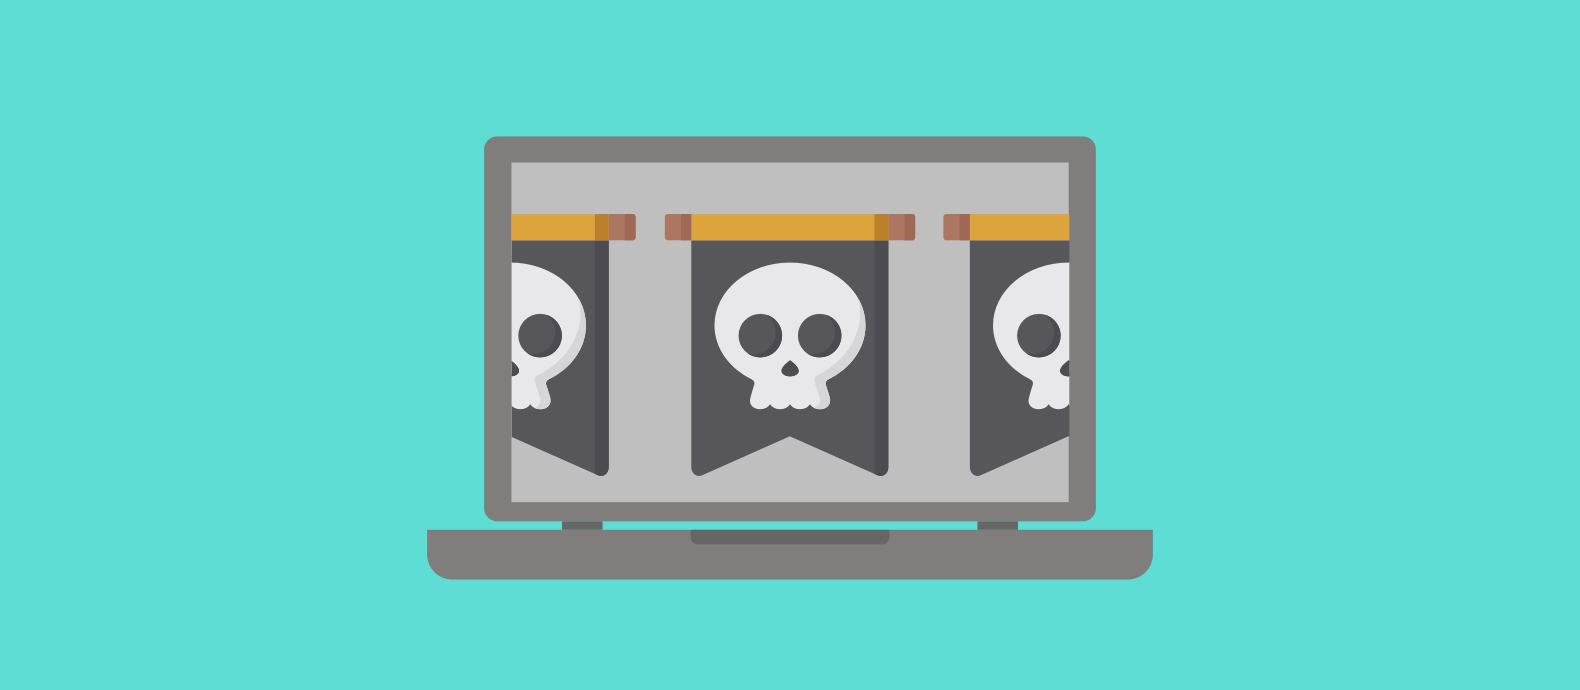 Hard facts about software piracy